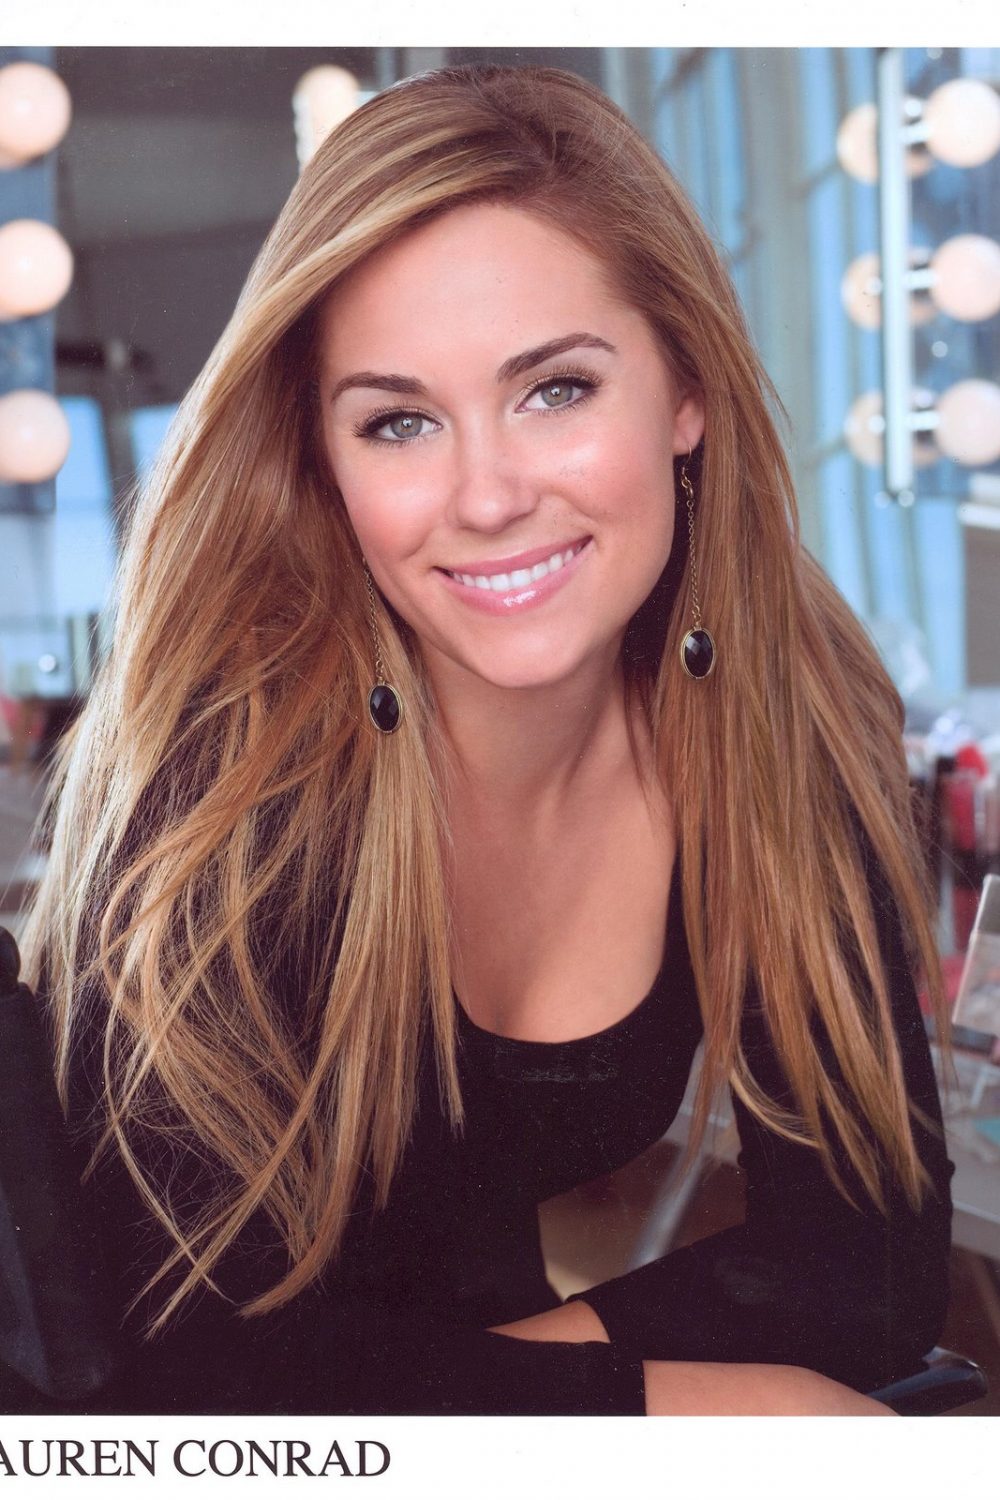 A Quick Second with LC (You Know, Lauren Conrad)